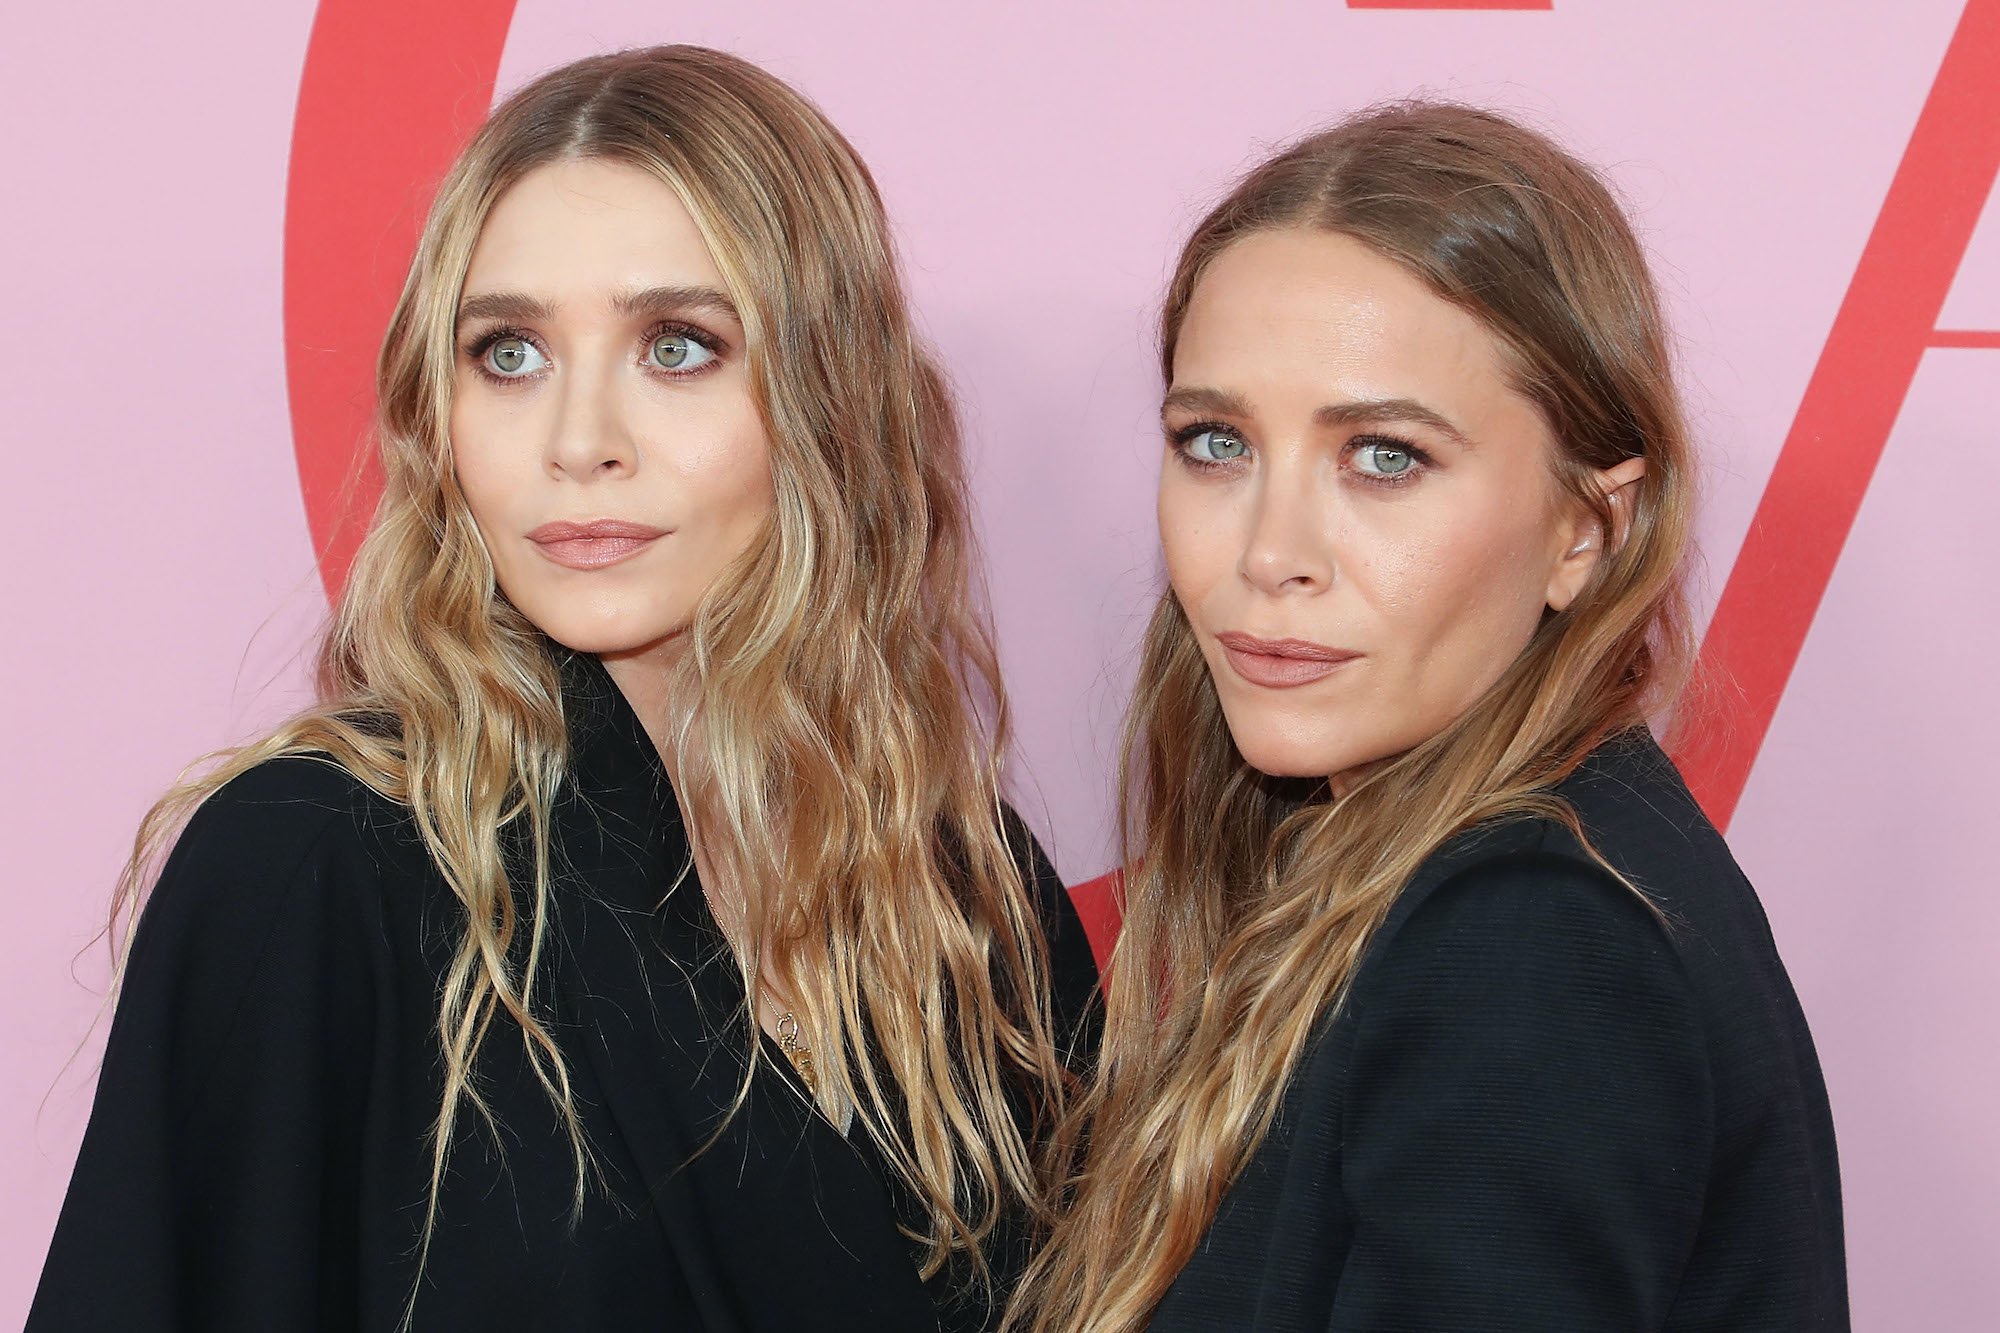 Mary-Kate and Ashley Olsen on the red carpet